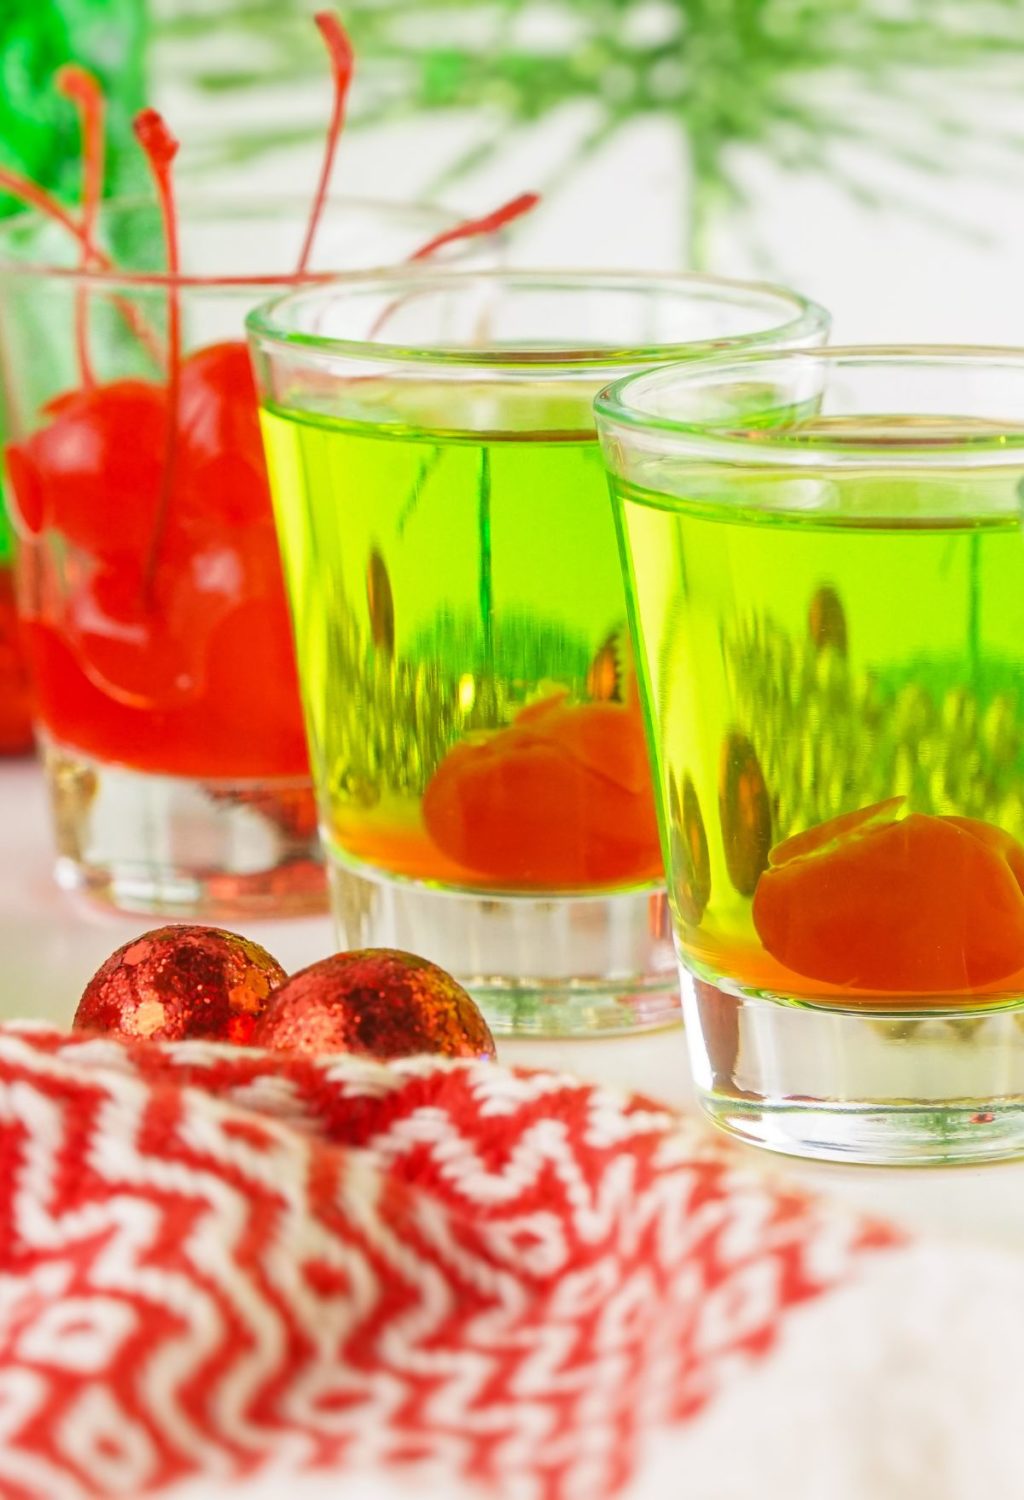 Two glasses of green liquid with cherries on a table.